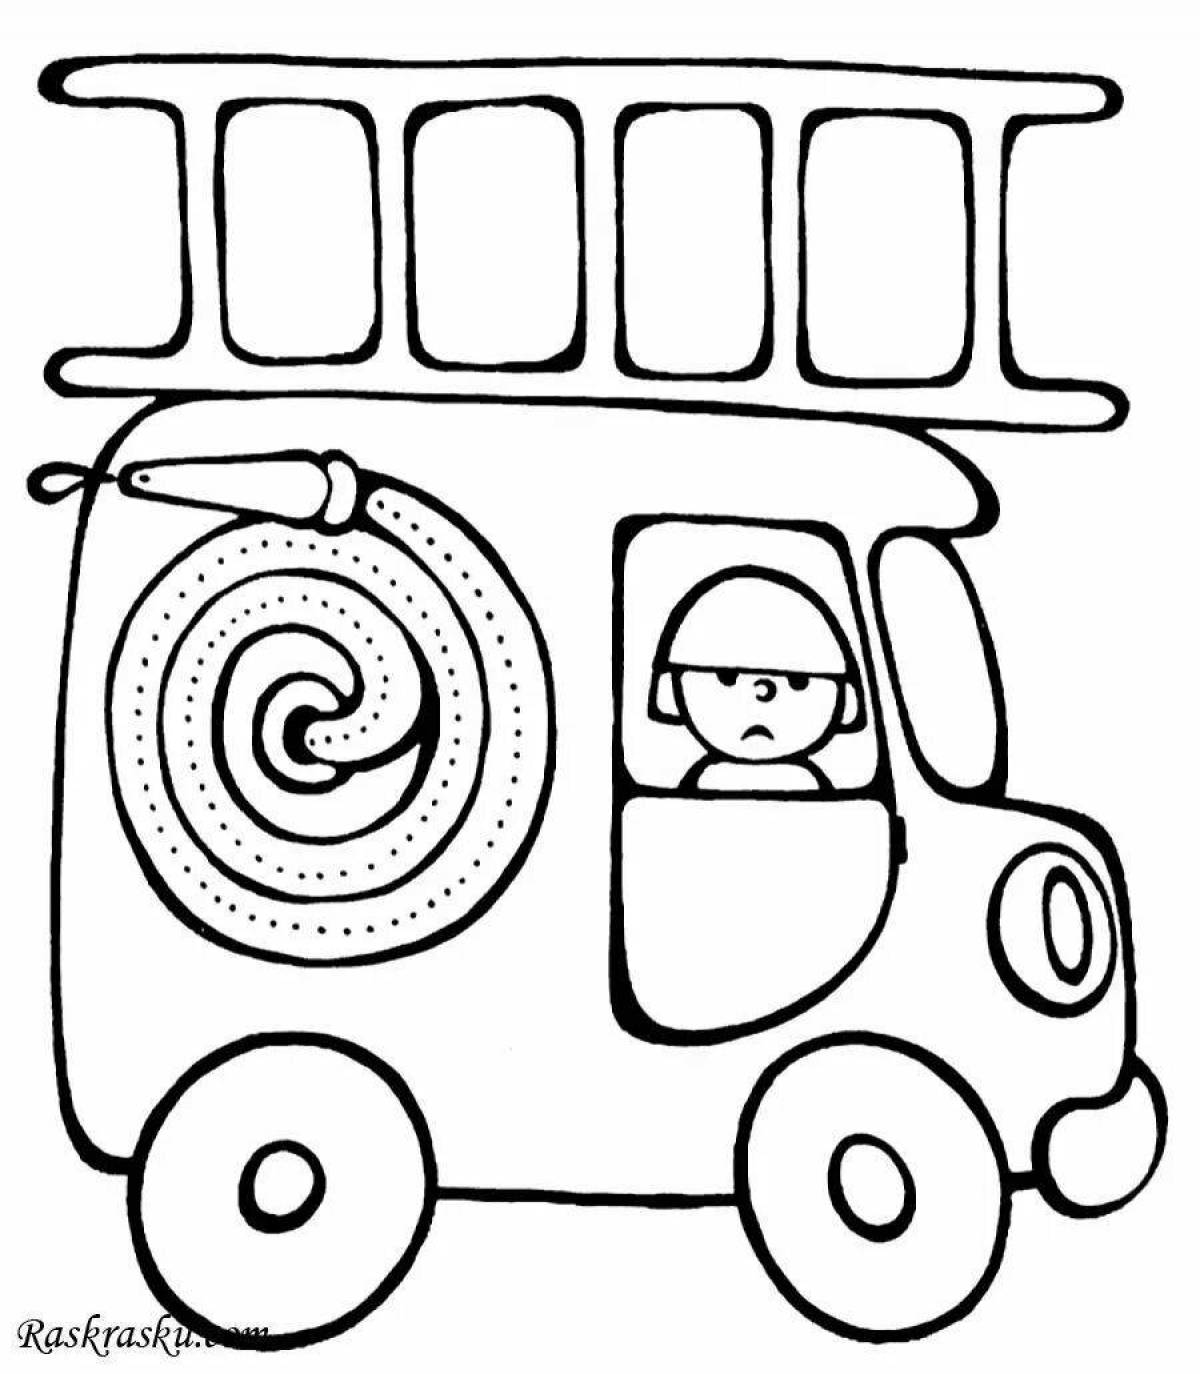 Bright transport coloring book for kids